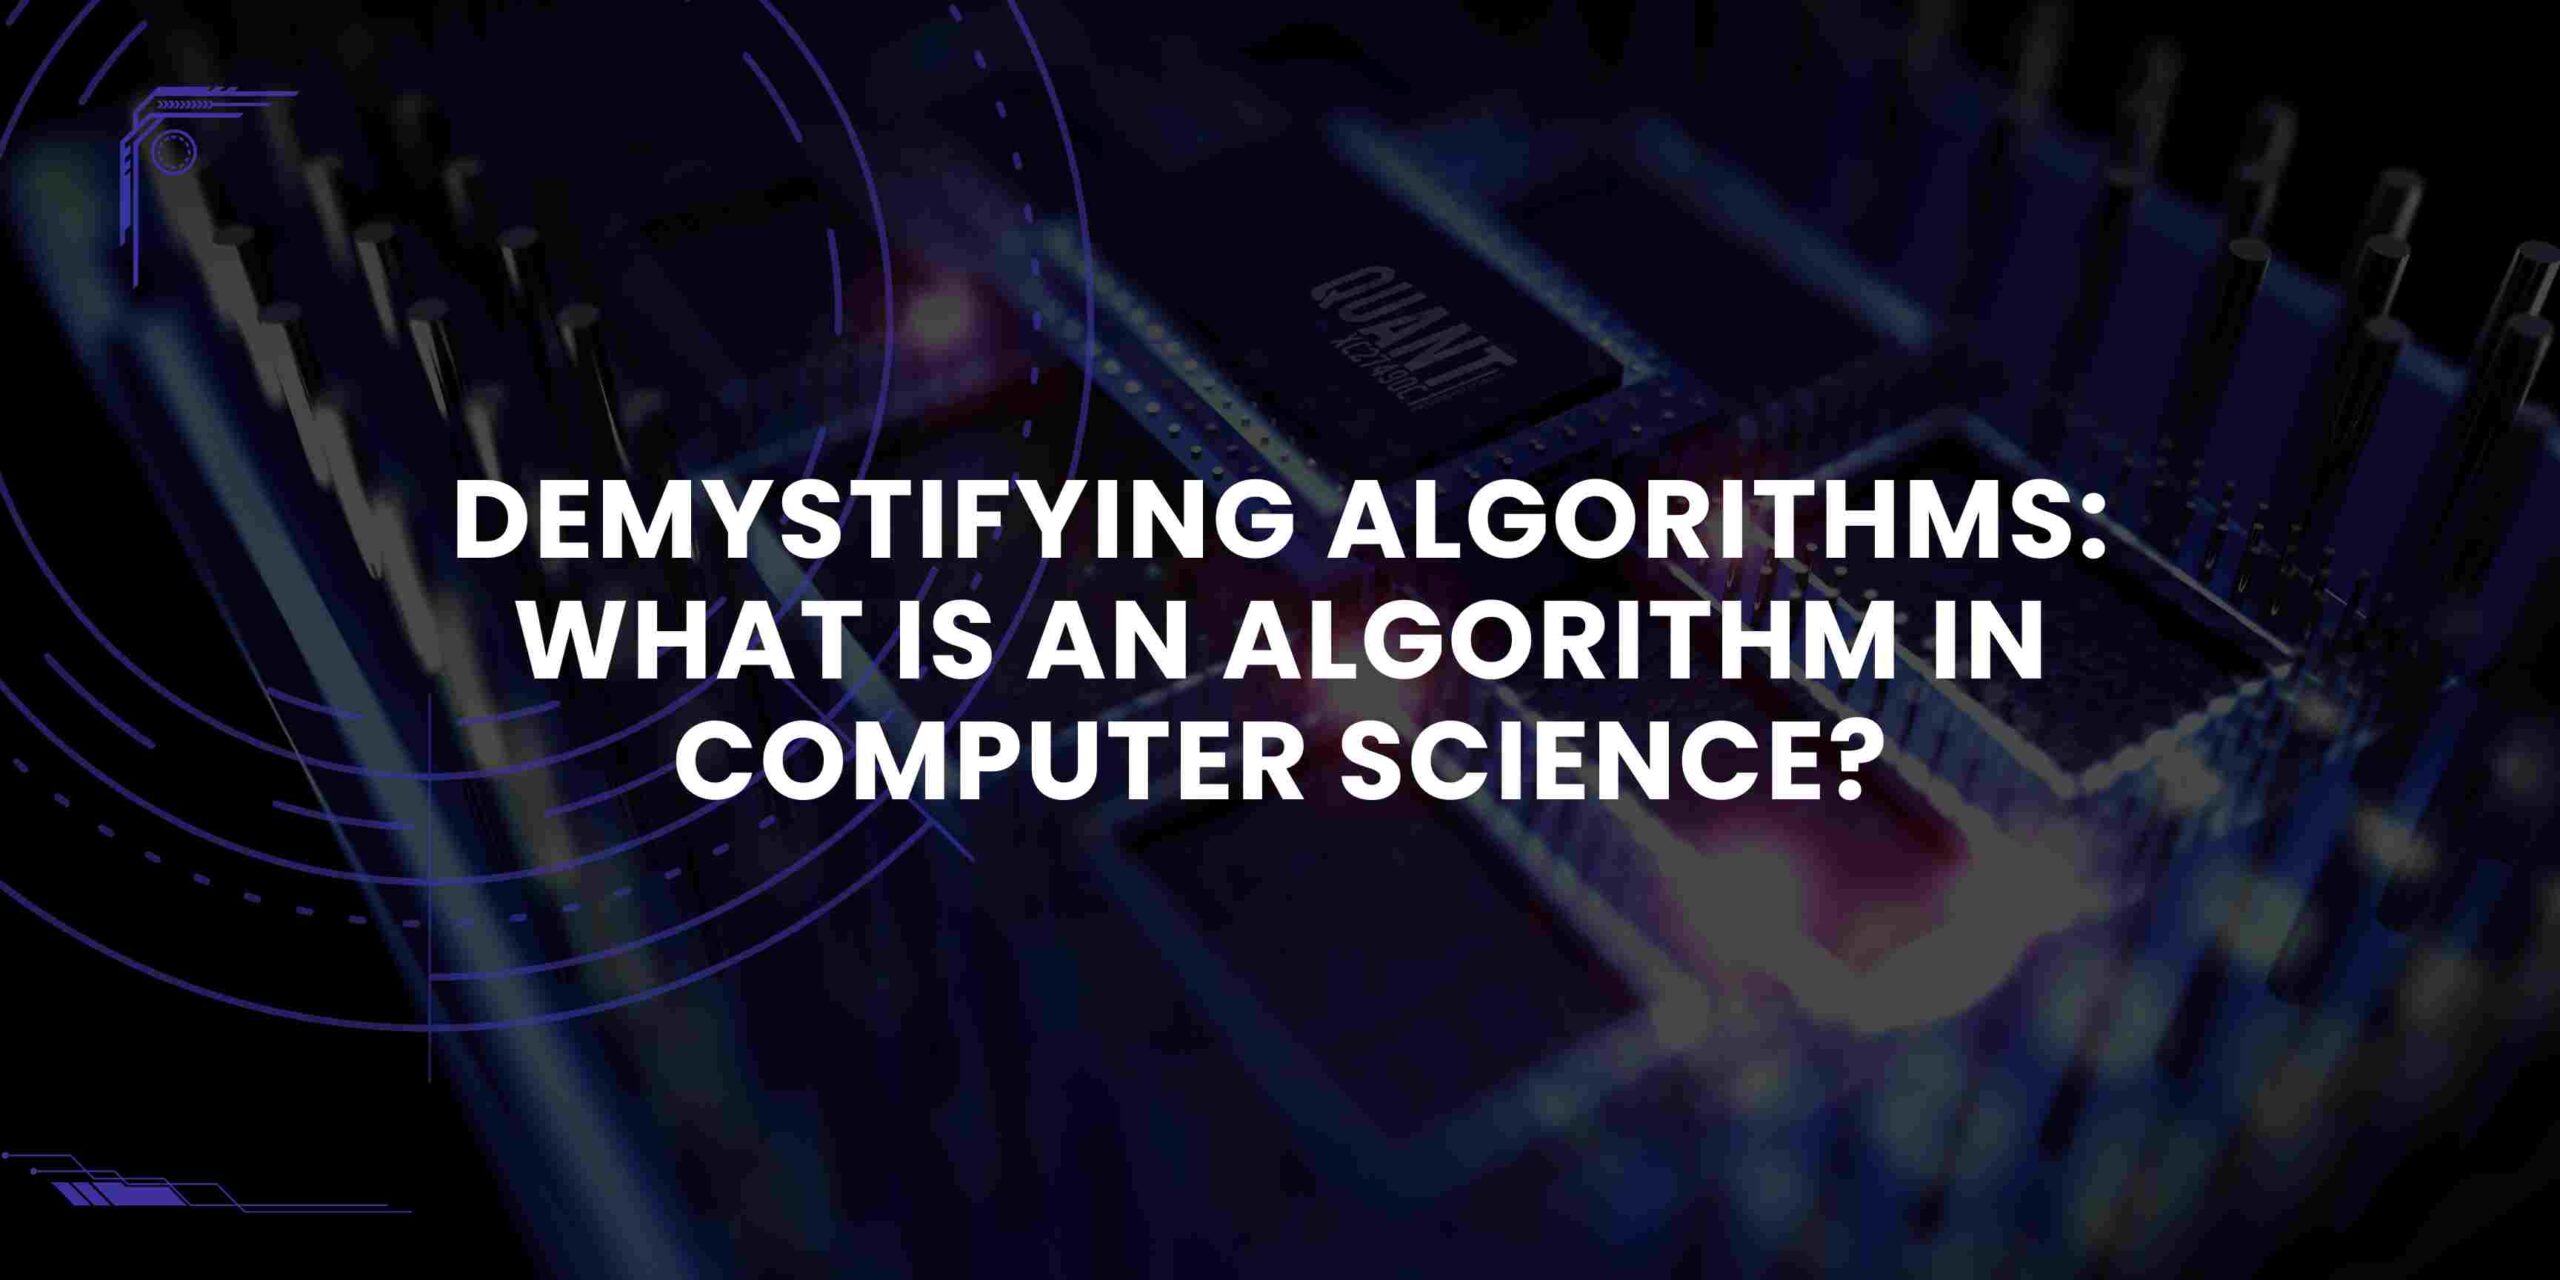 Demystifying Algorithms: What is an Algorithm in Computer Science?